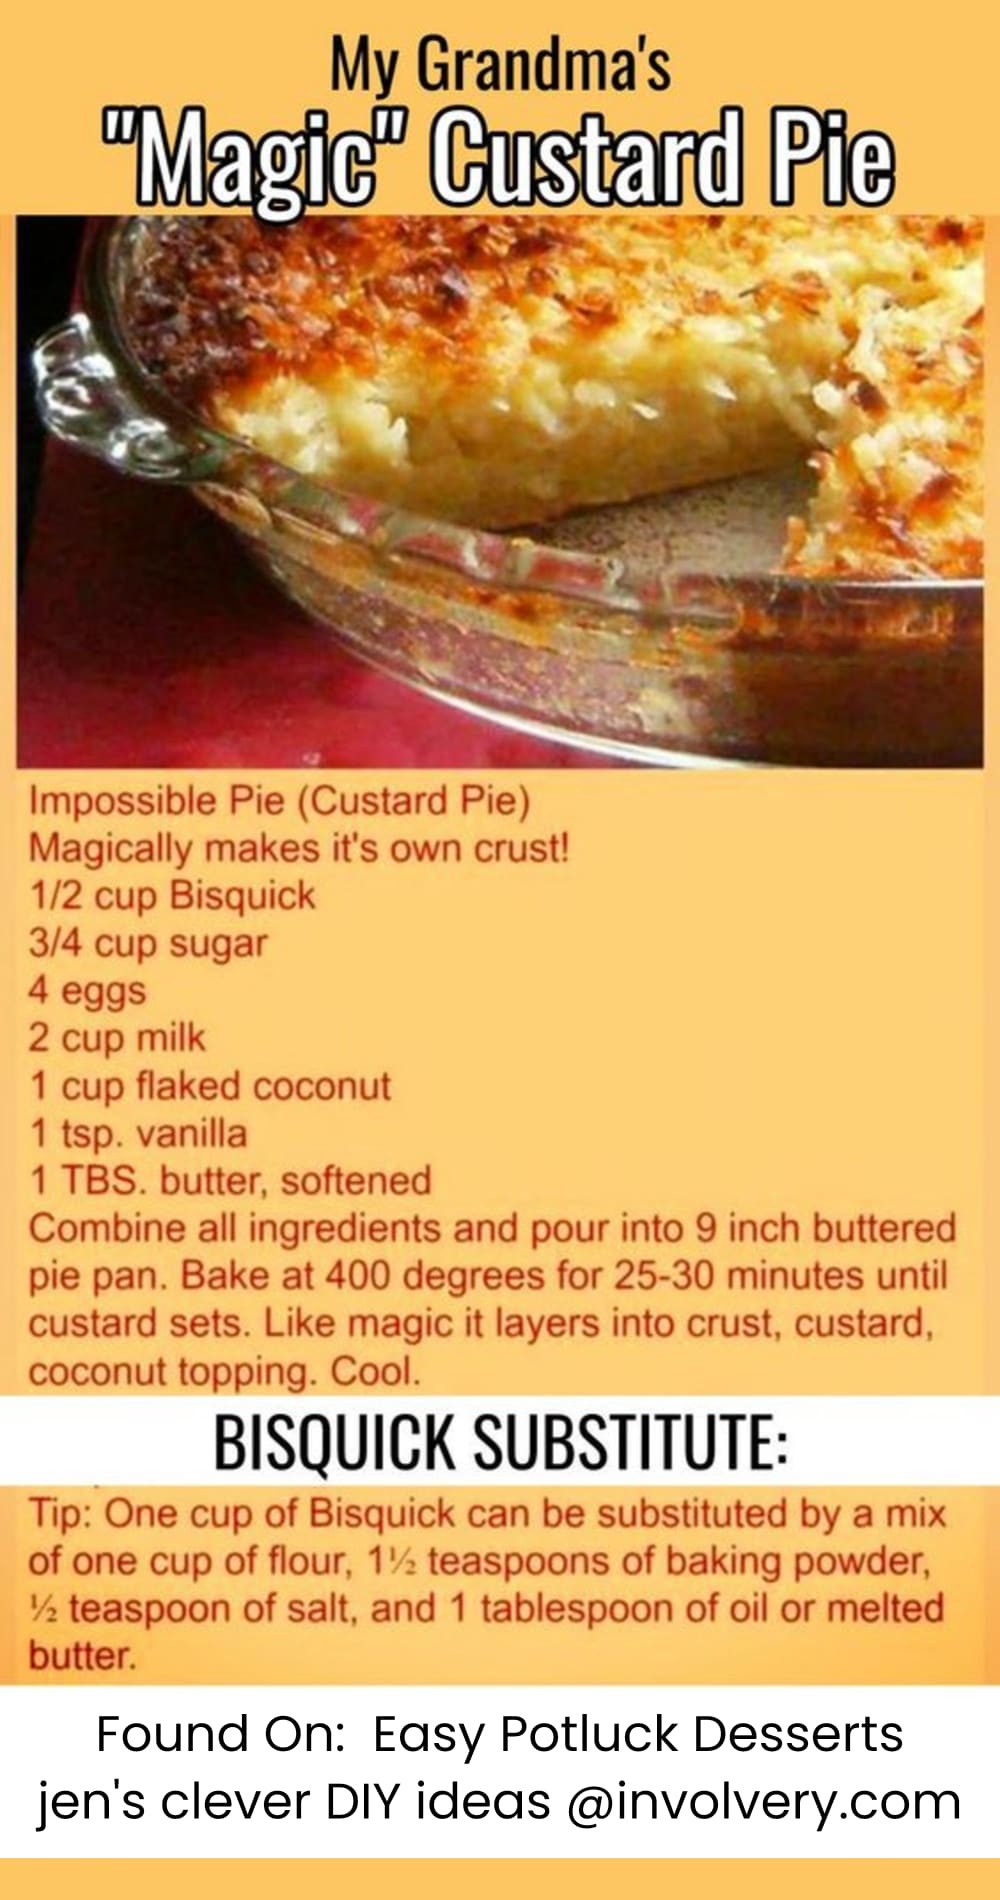 magic custard pie recipe from Easy Potluck Desserts For a Crowd, Church or Family Reunion Group